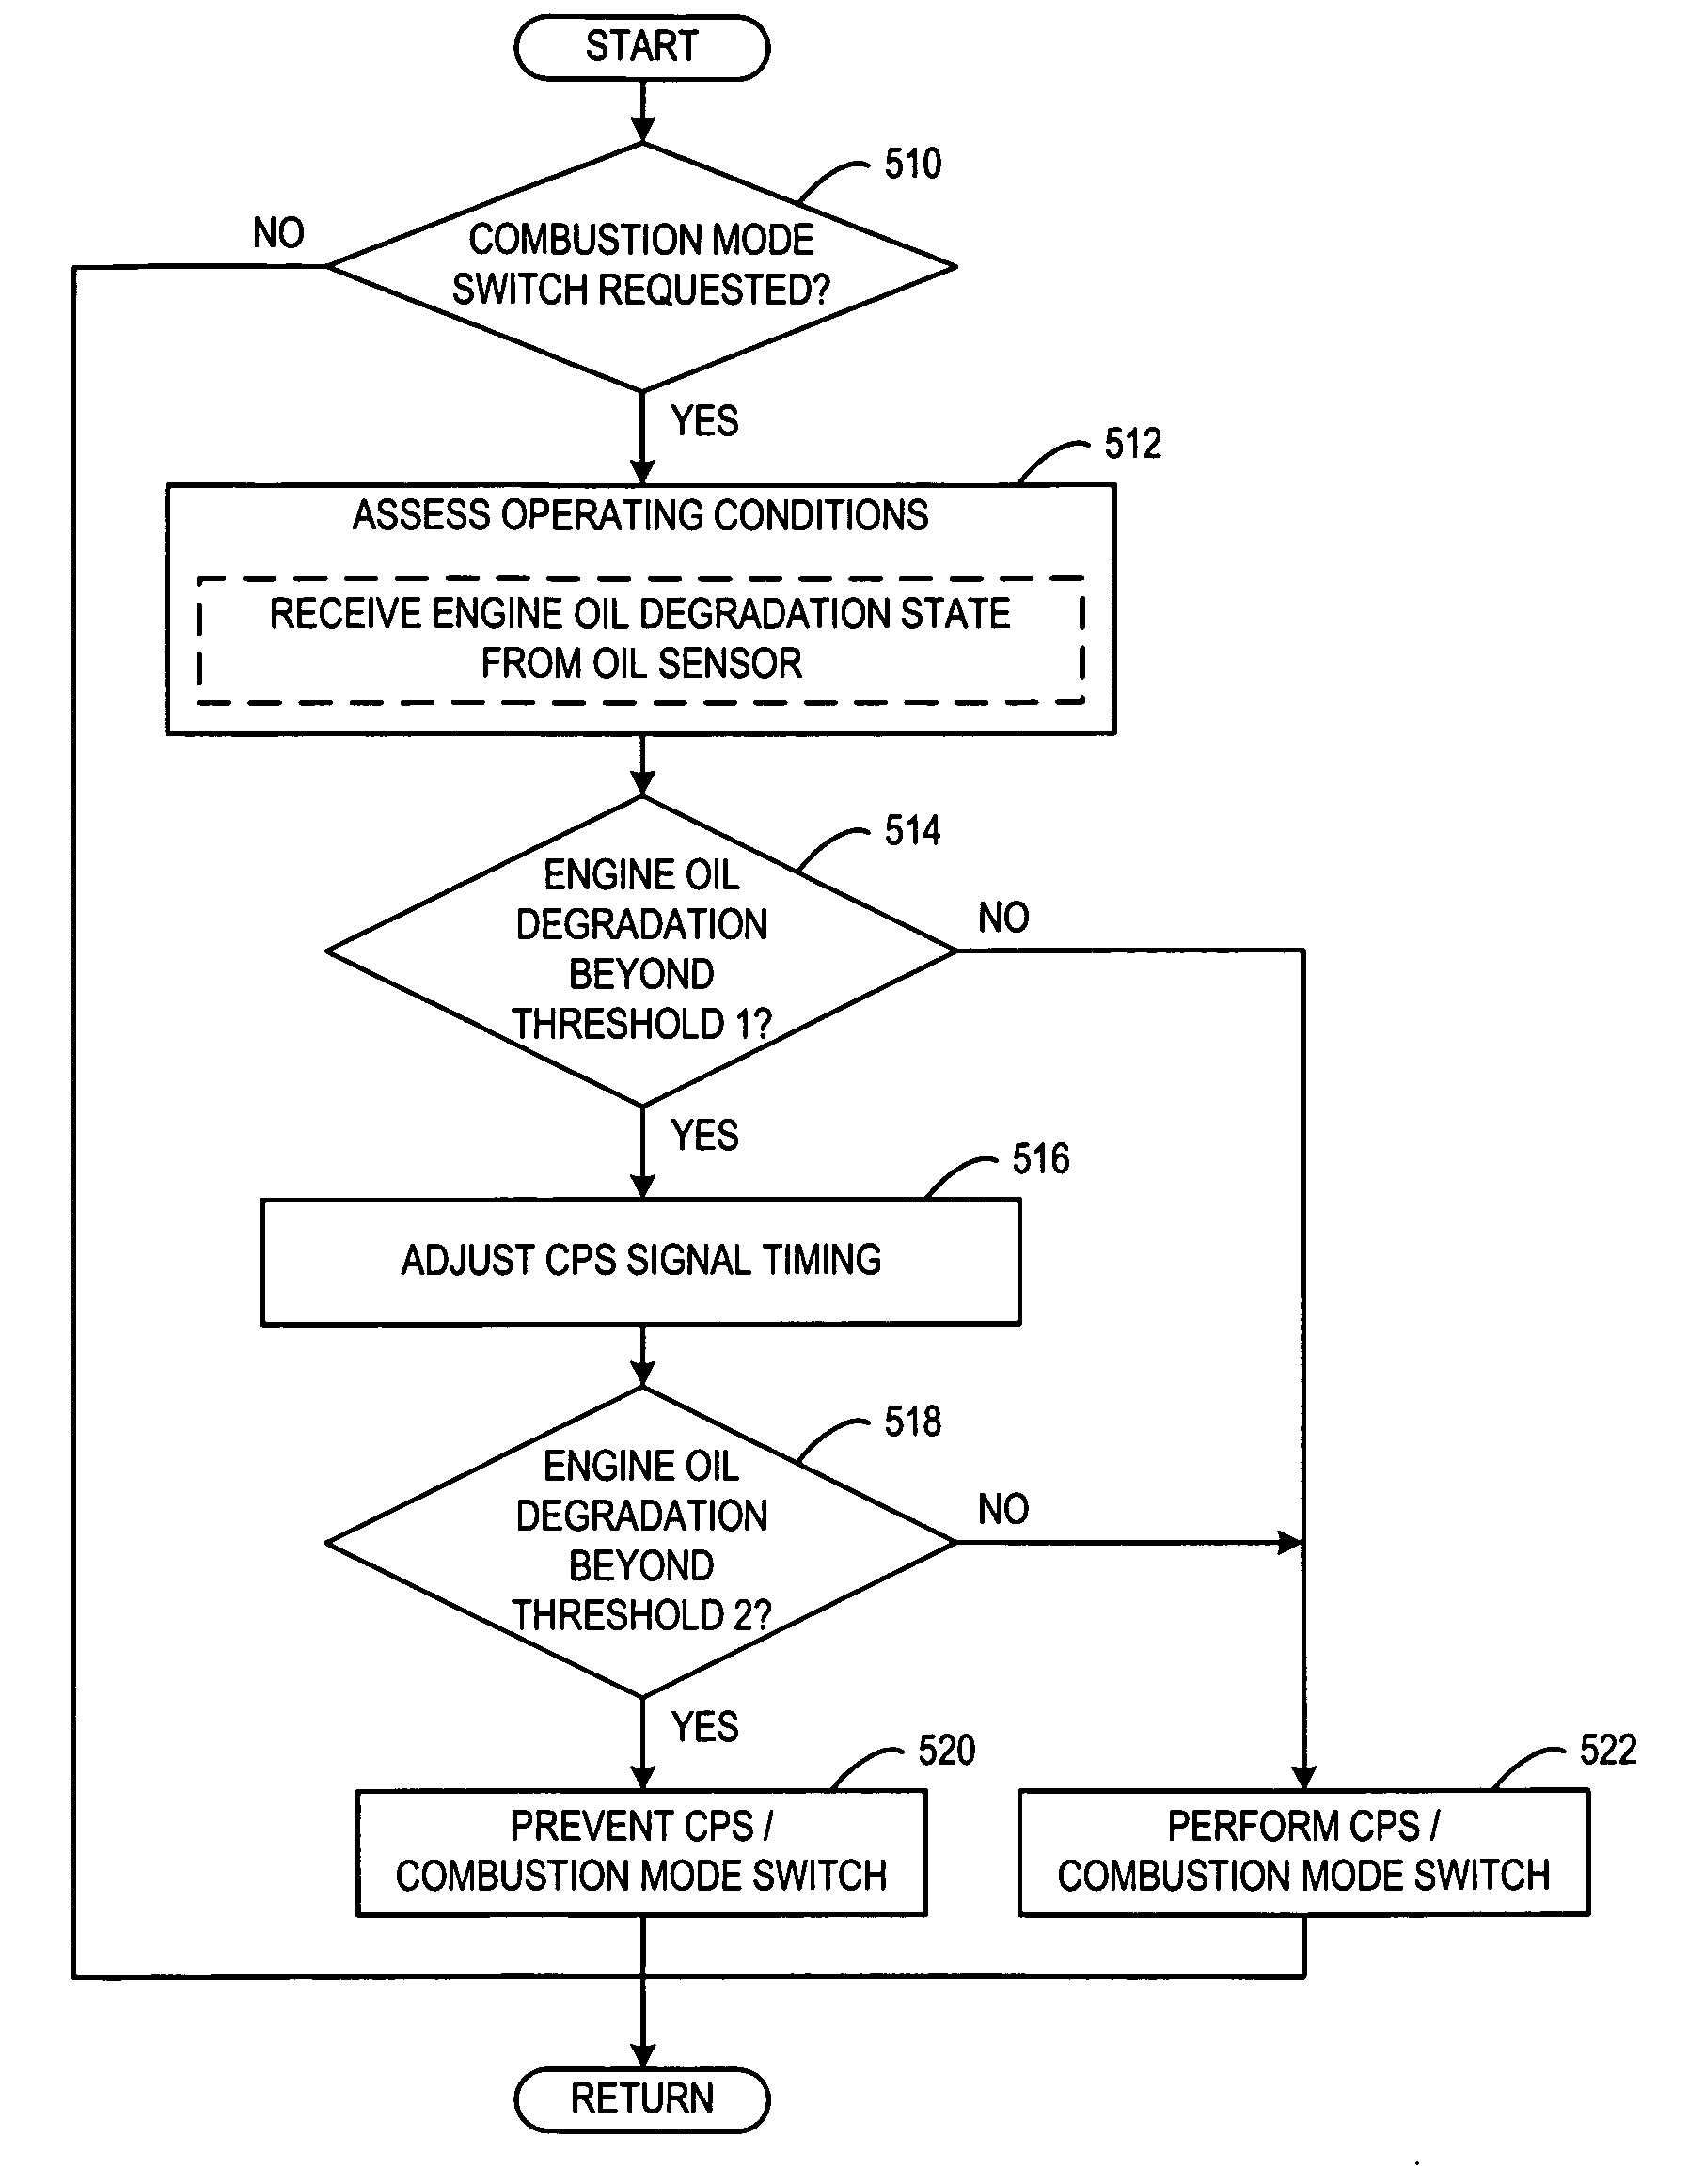 Approach for adaptive control of cam profile switching for combustion mode transitions